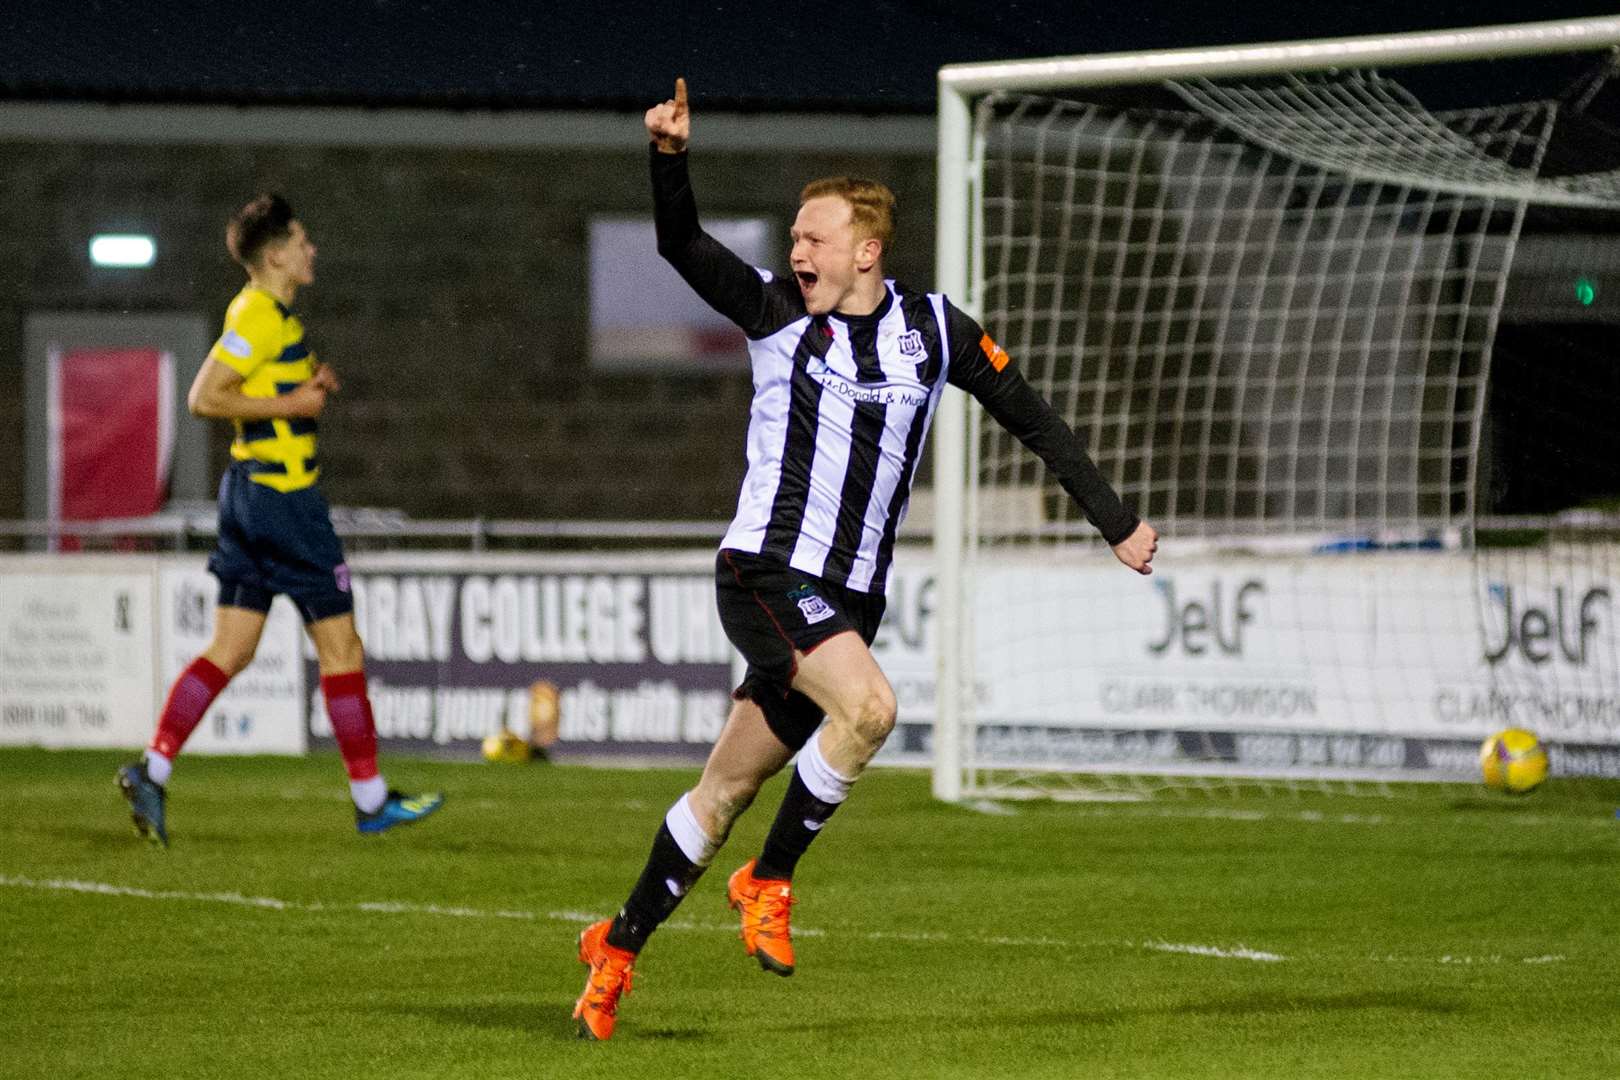 Russell Dingwall scored in Elgin City's 3-1 win over Stirling. Picture: Daniel Forsyth..